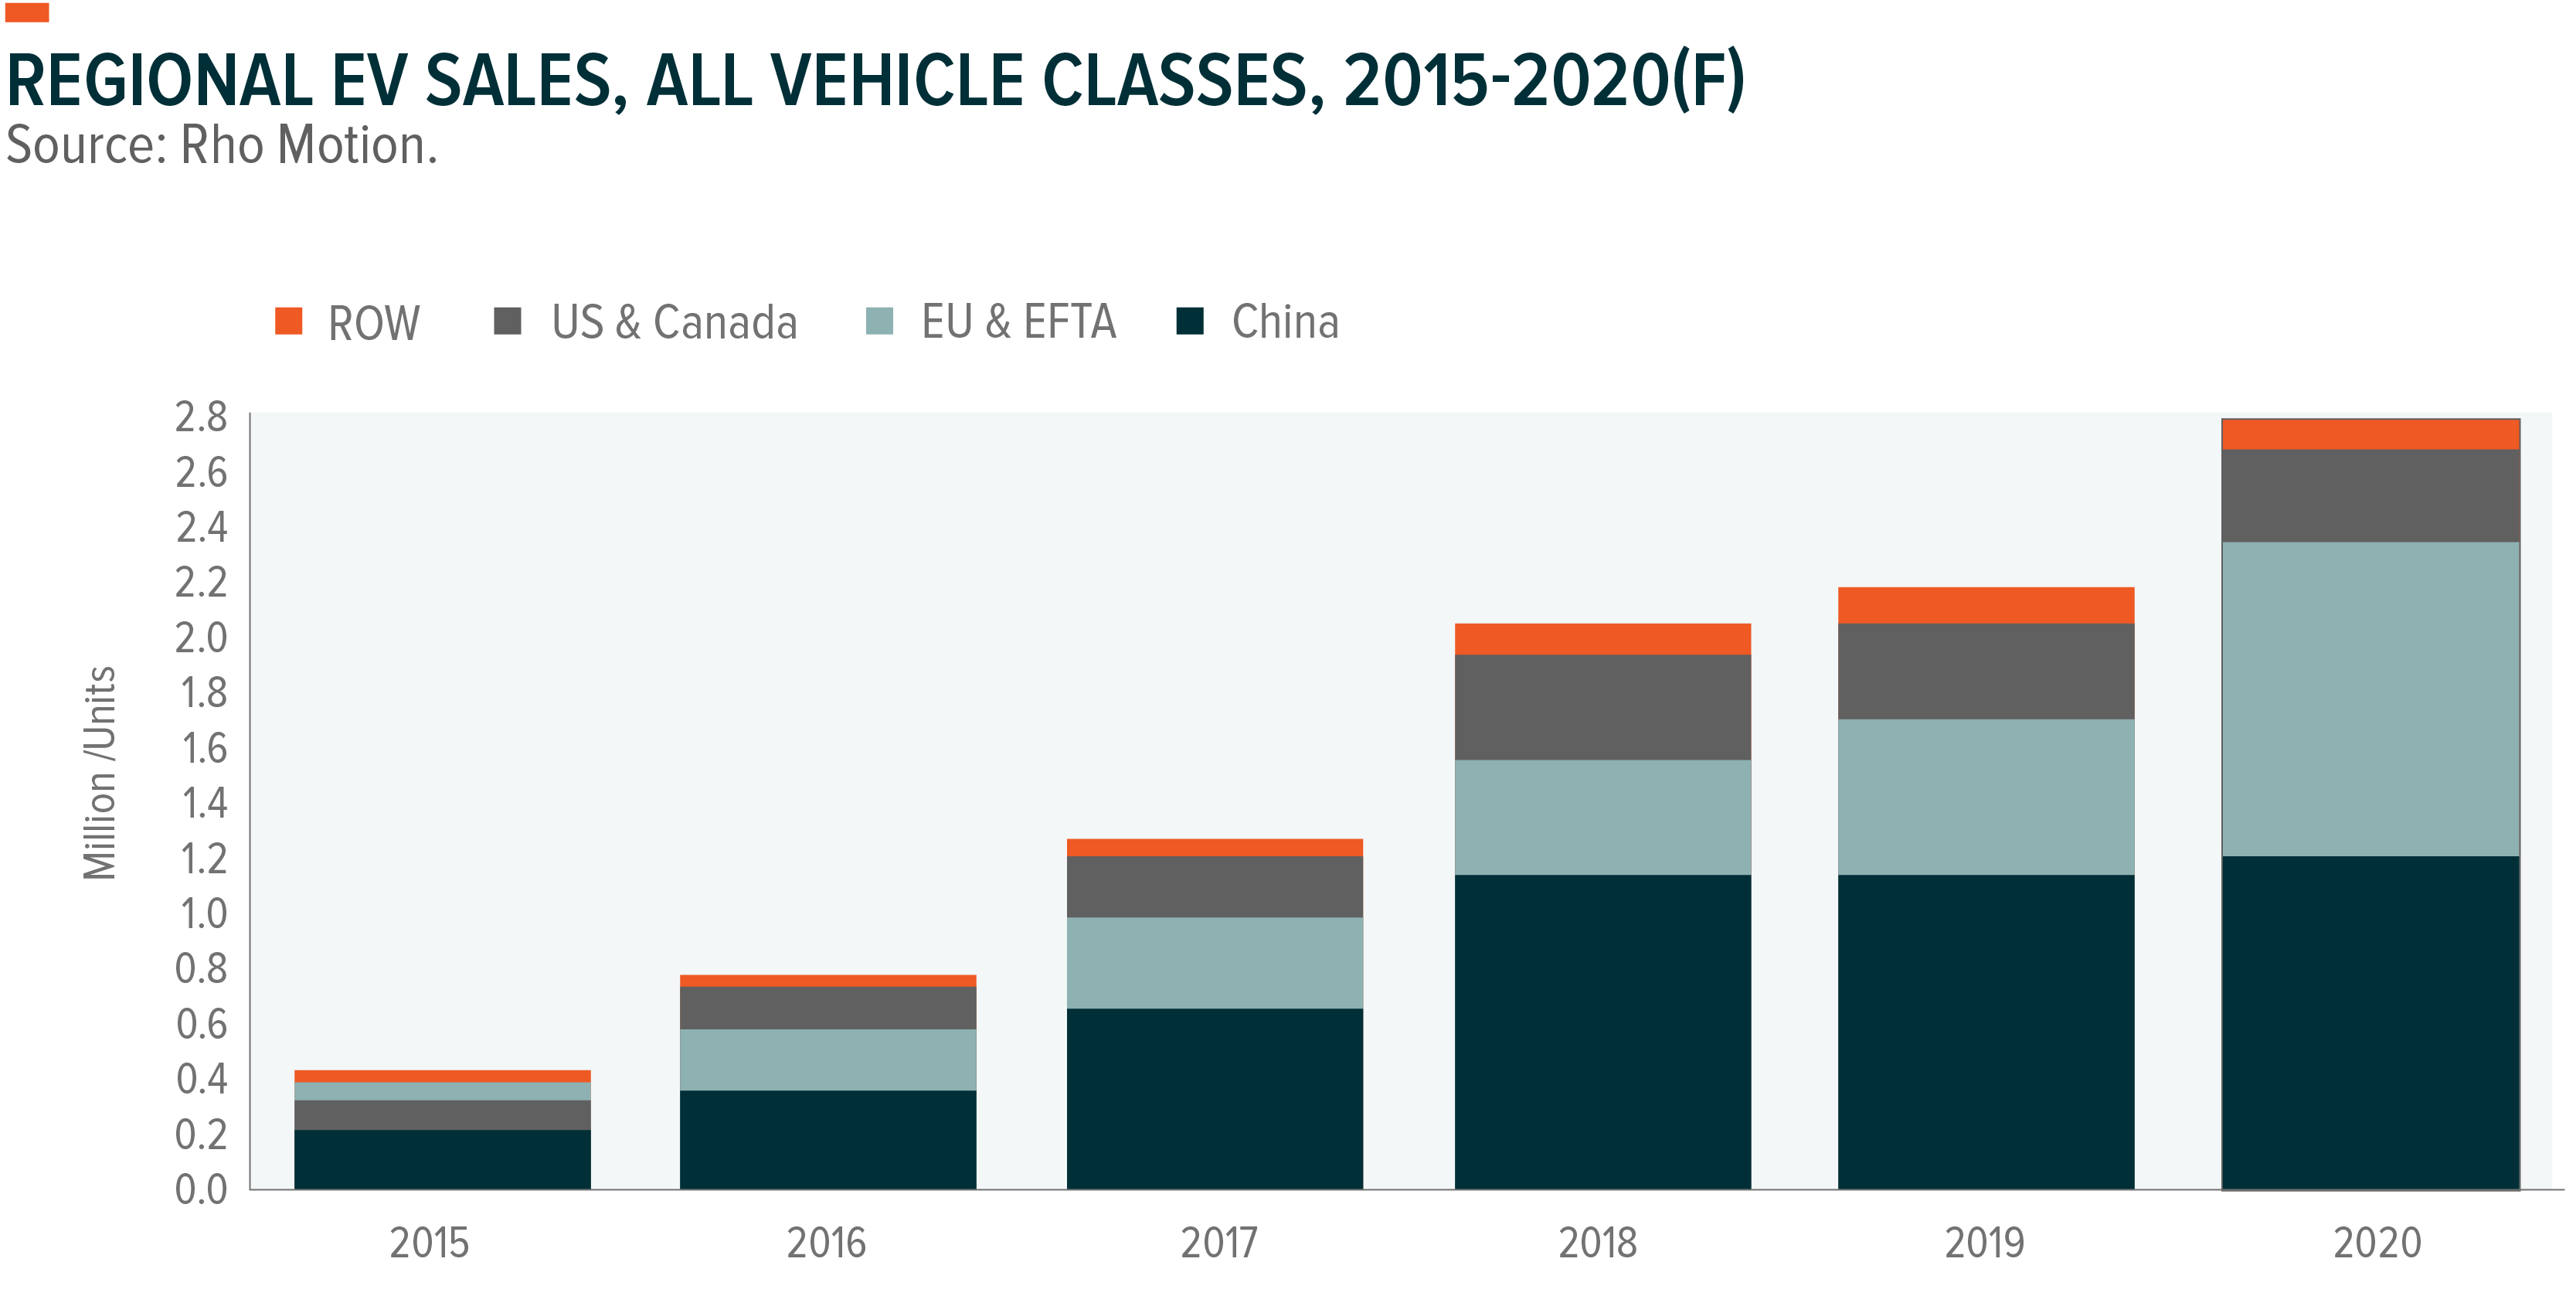 Annual Electric Vehicle (EV) Sales in Units